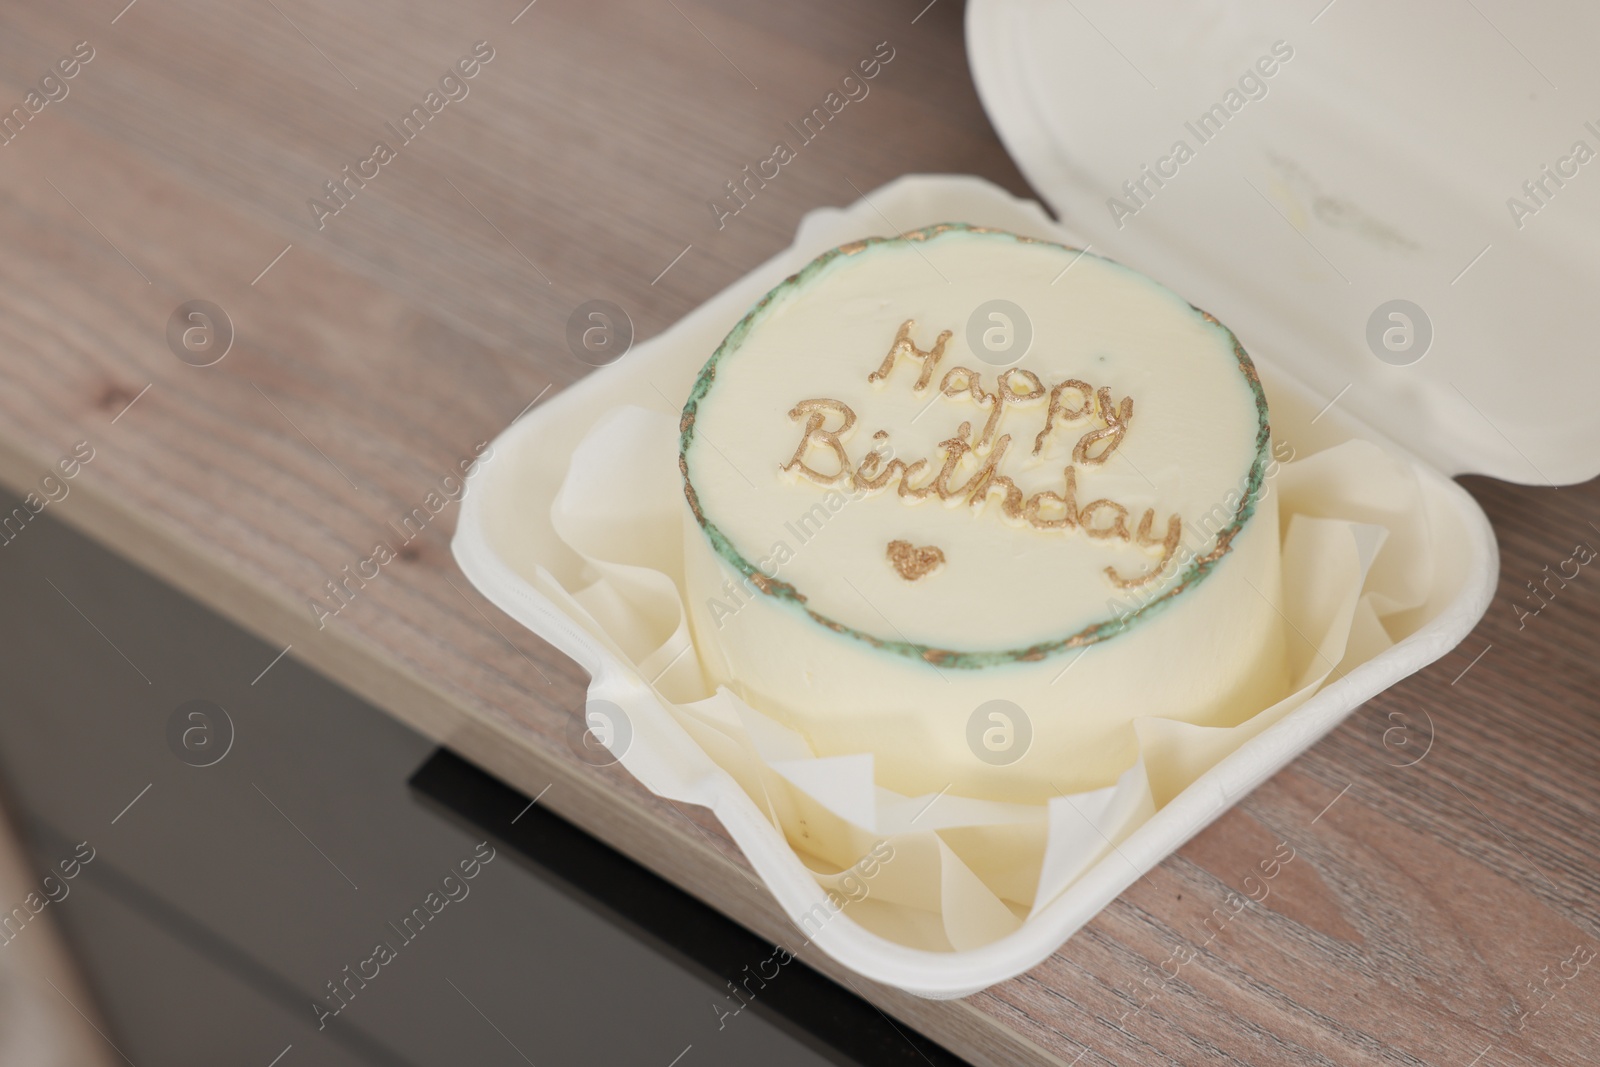 Photo of Delicious decorated Birthday cake on wooden surface indoors